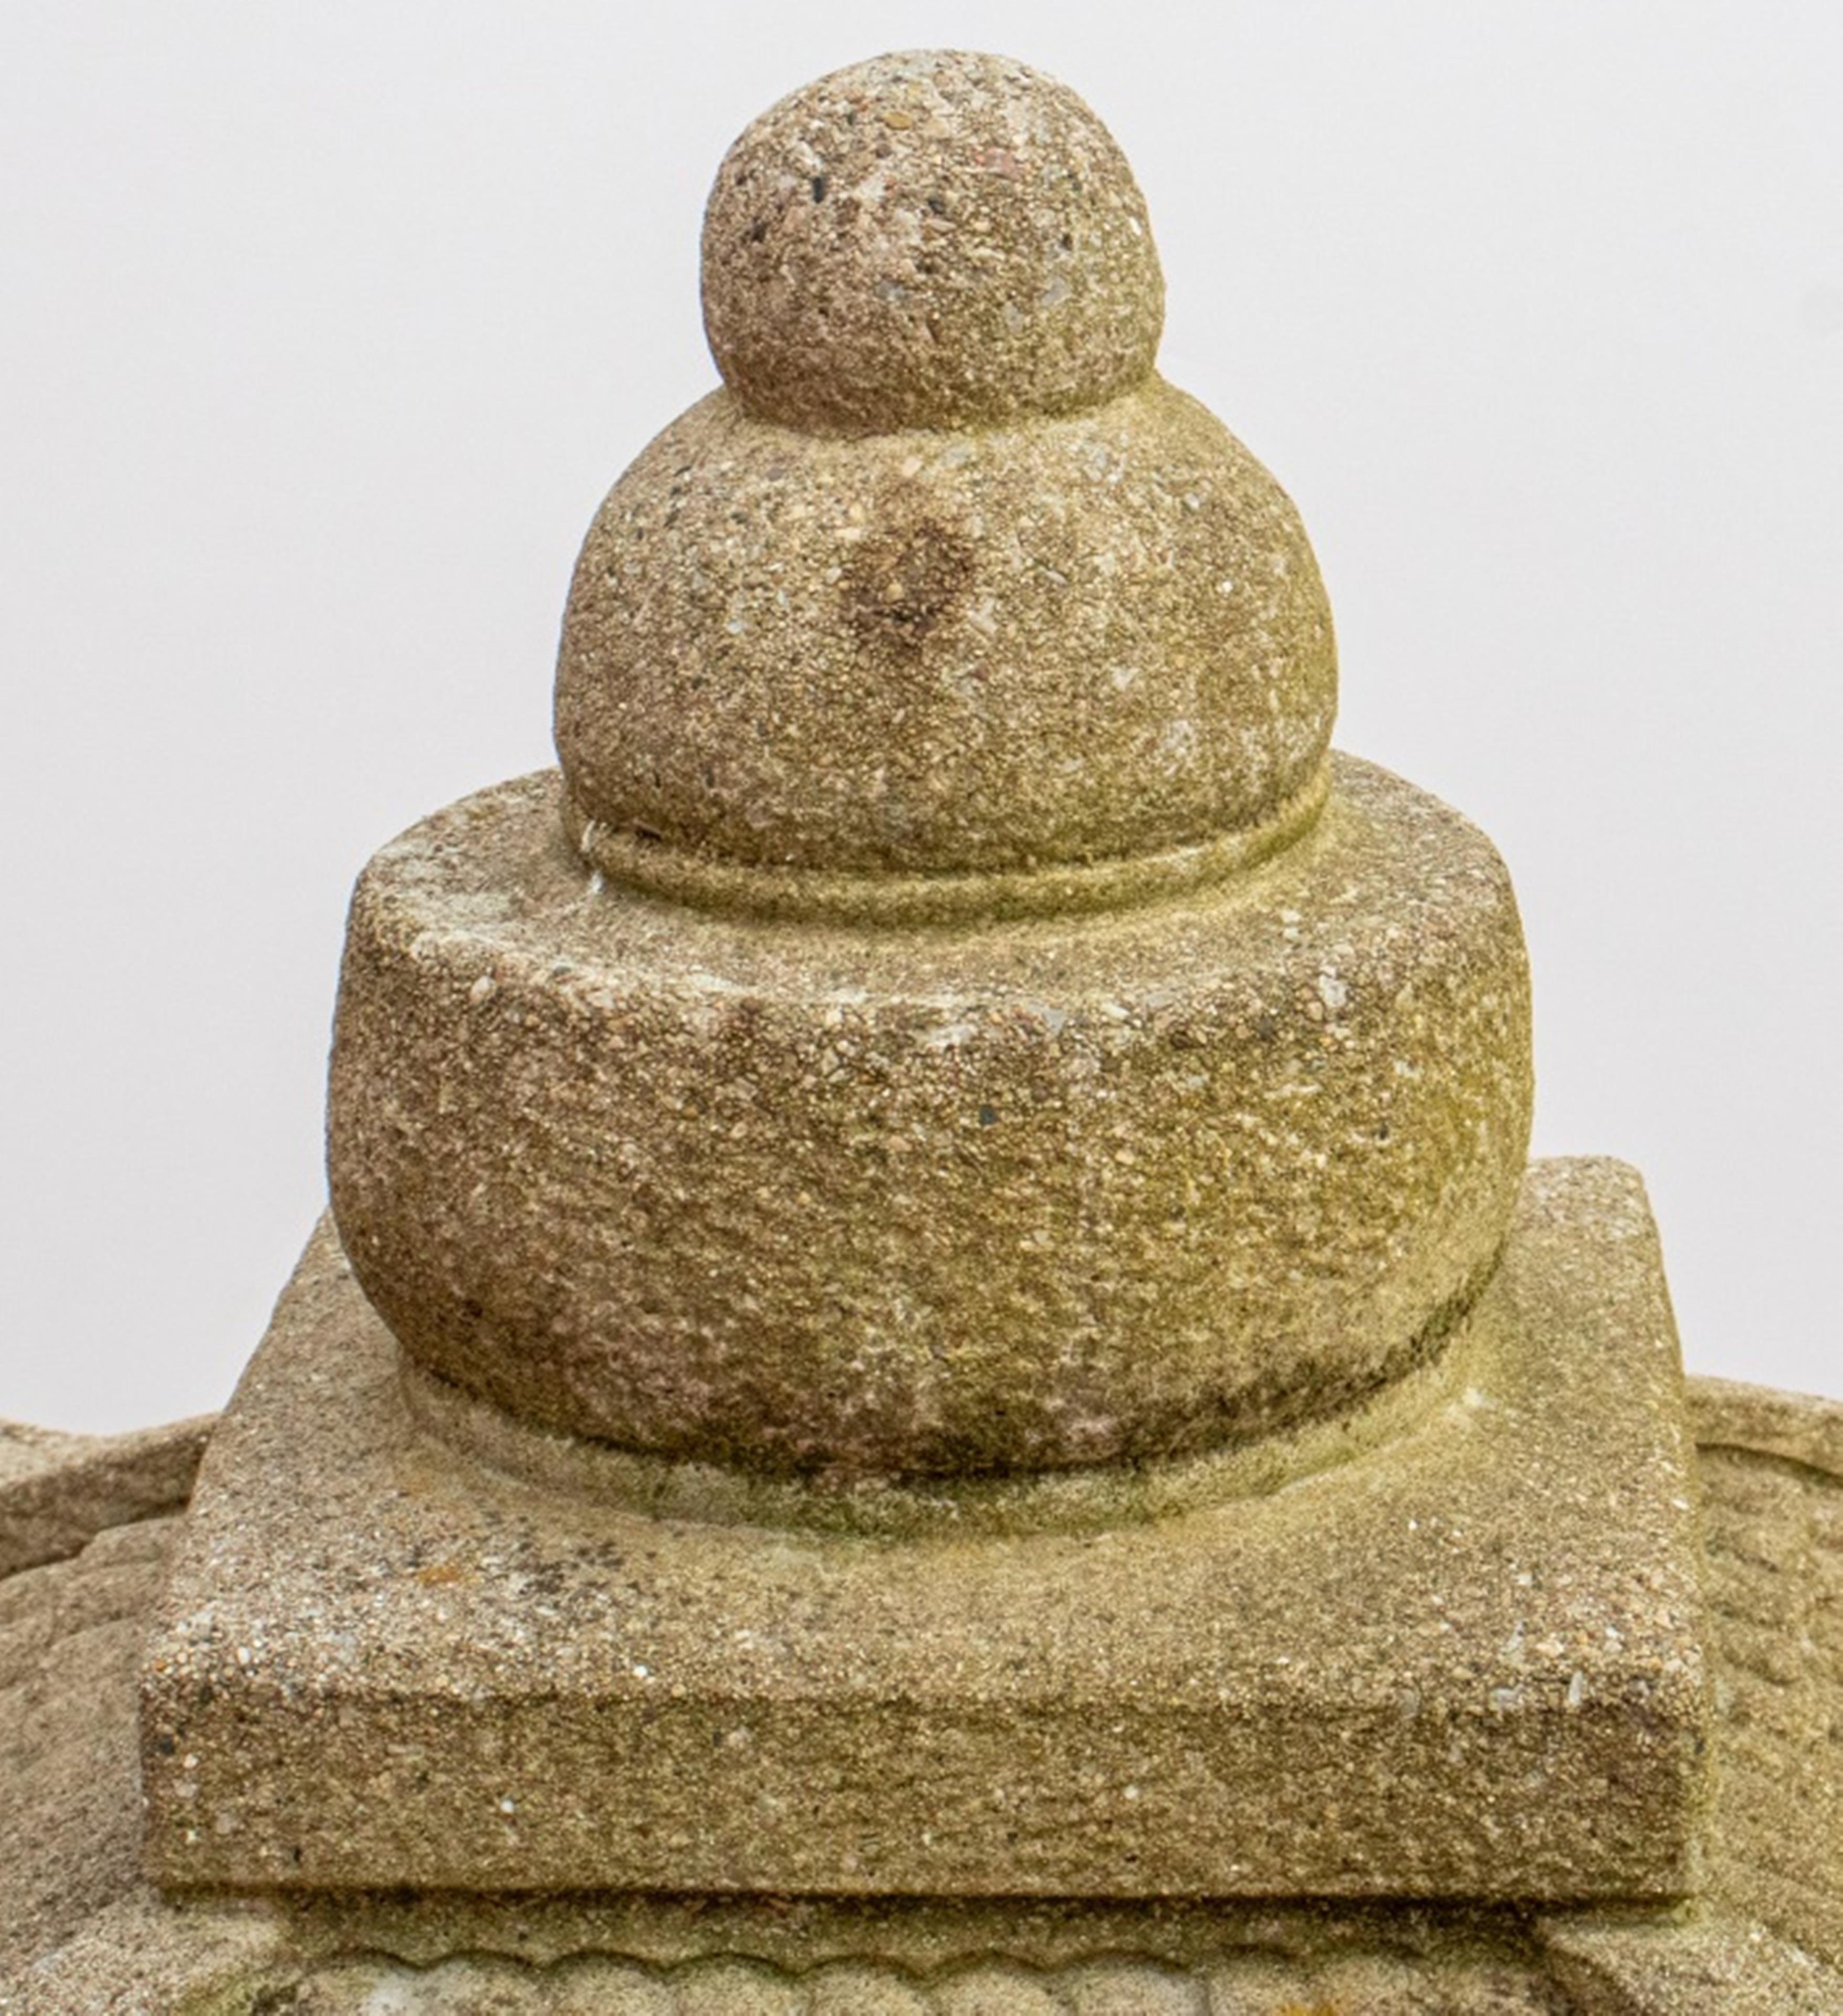 Single square cement pagoda landscape ornament in two sections; 
Dimensions: 18